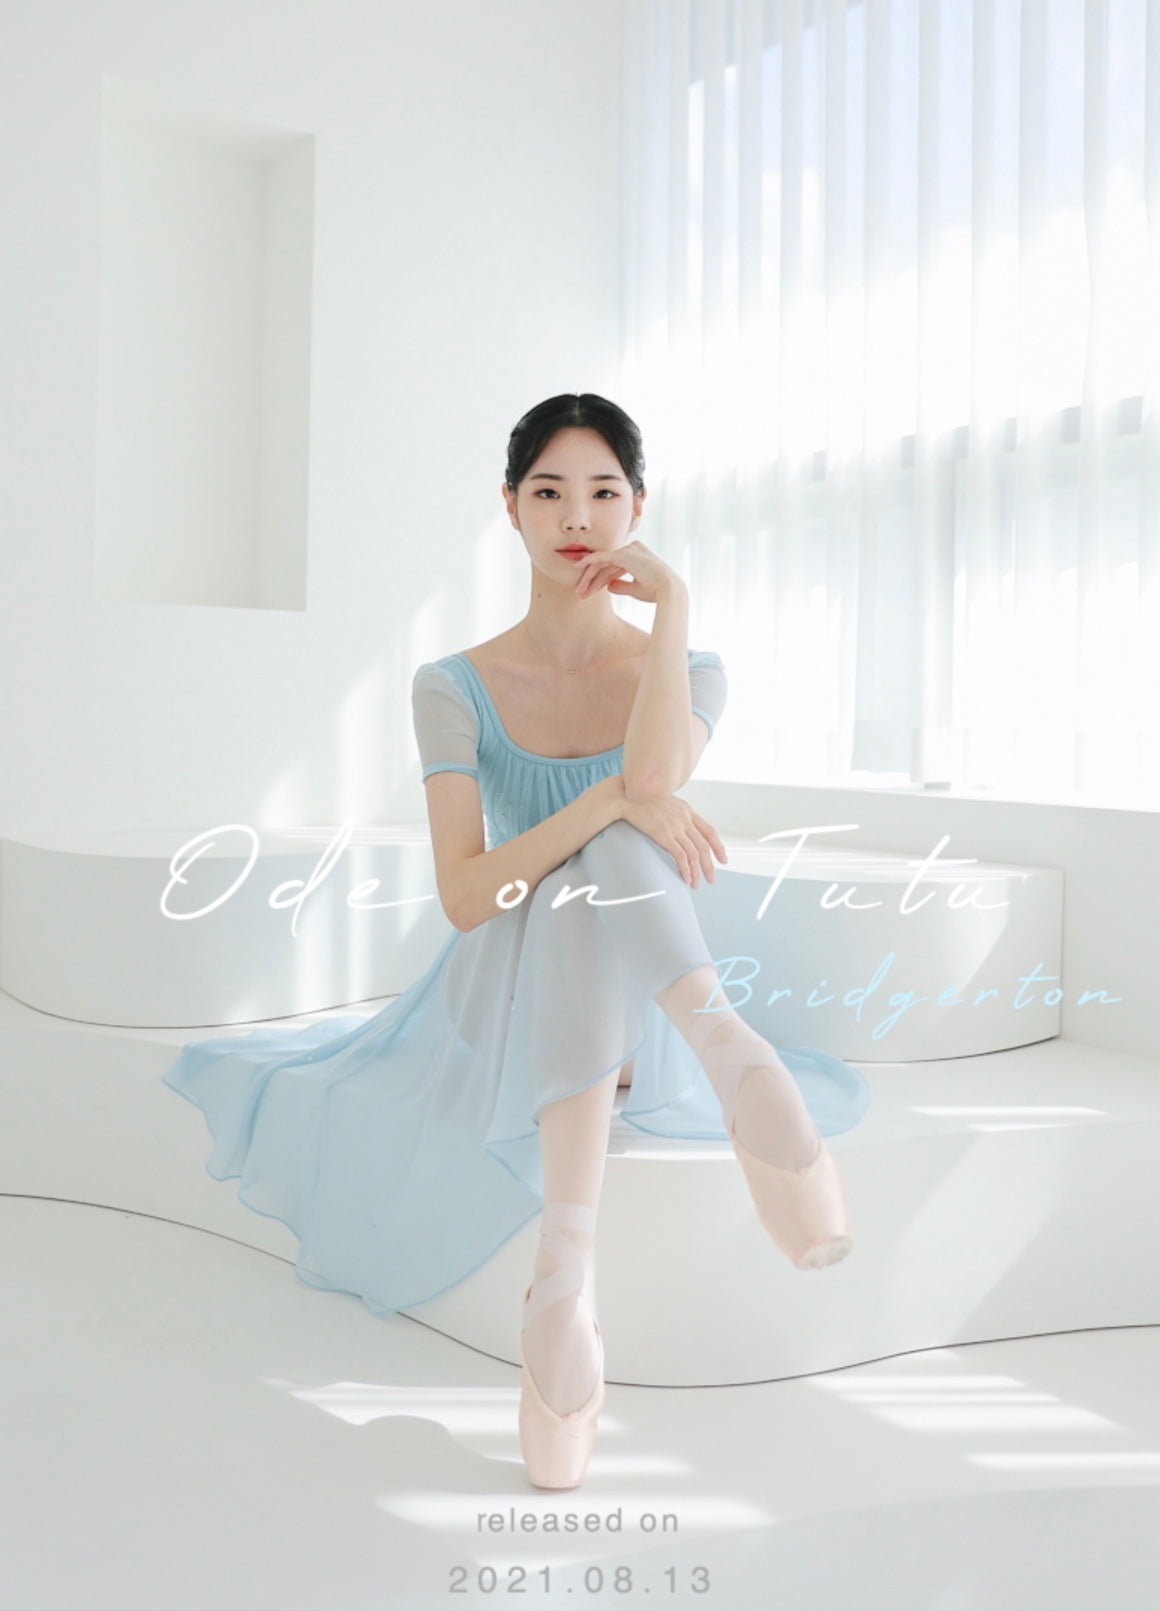 When You Are Alone Skirt [Ode on Tutu]